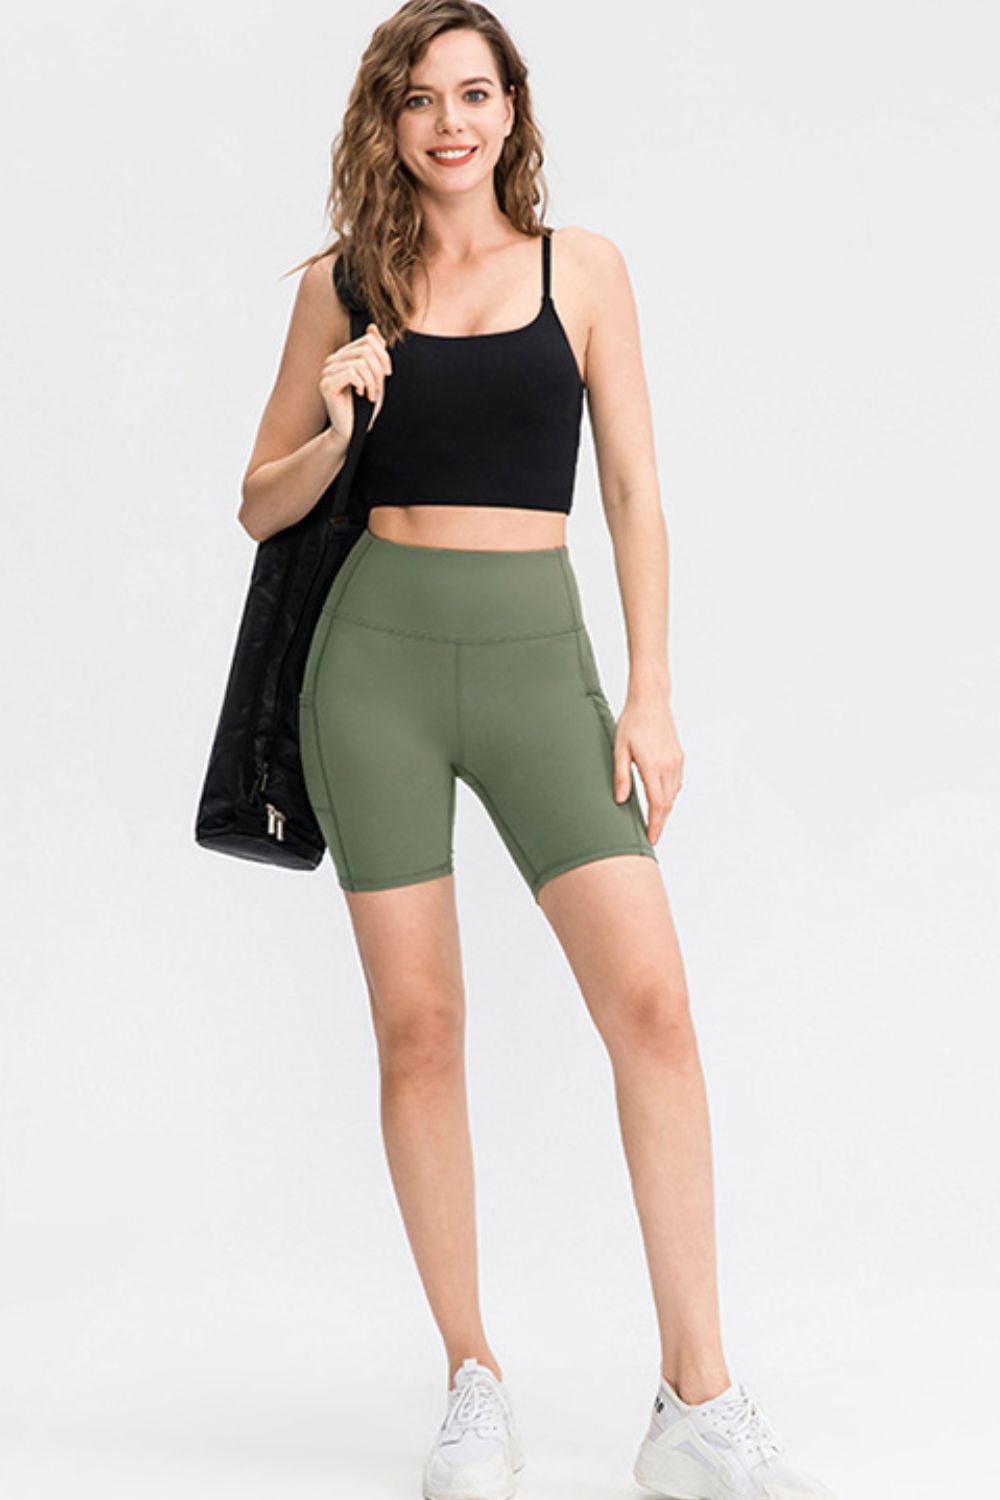 Wide Waistband Sports Shorts with Pockets - Nicole Lee Apparel